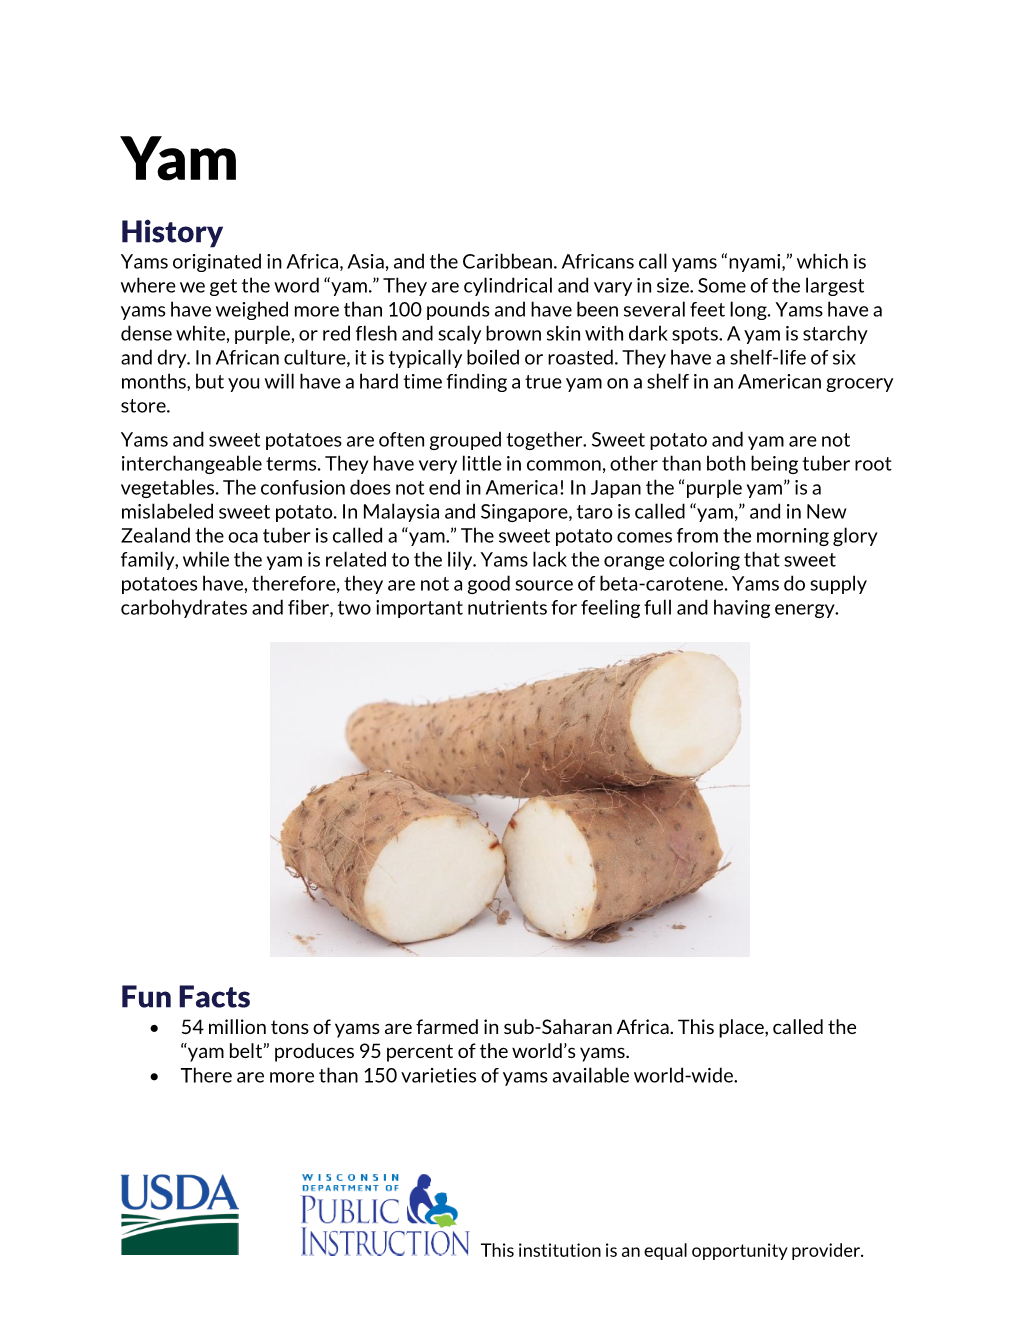 What Was Yam in History?